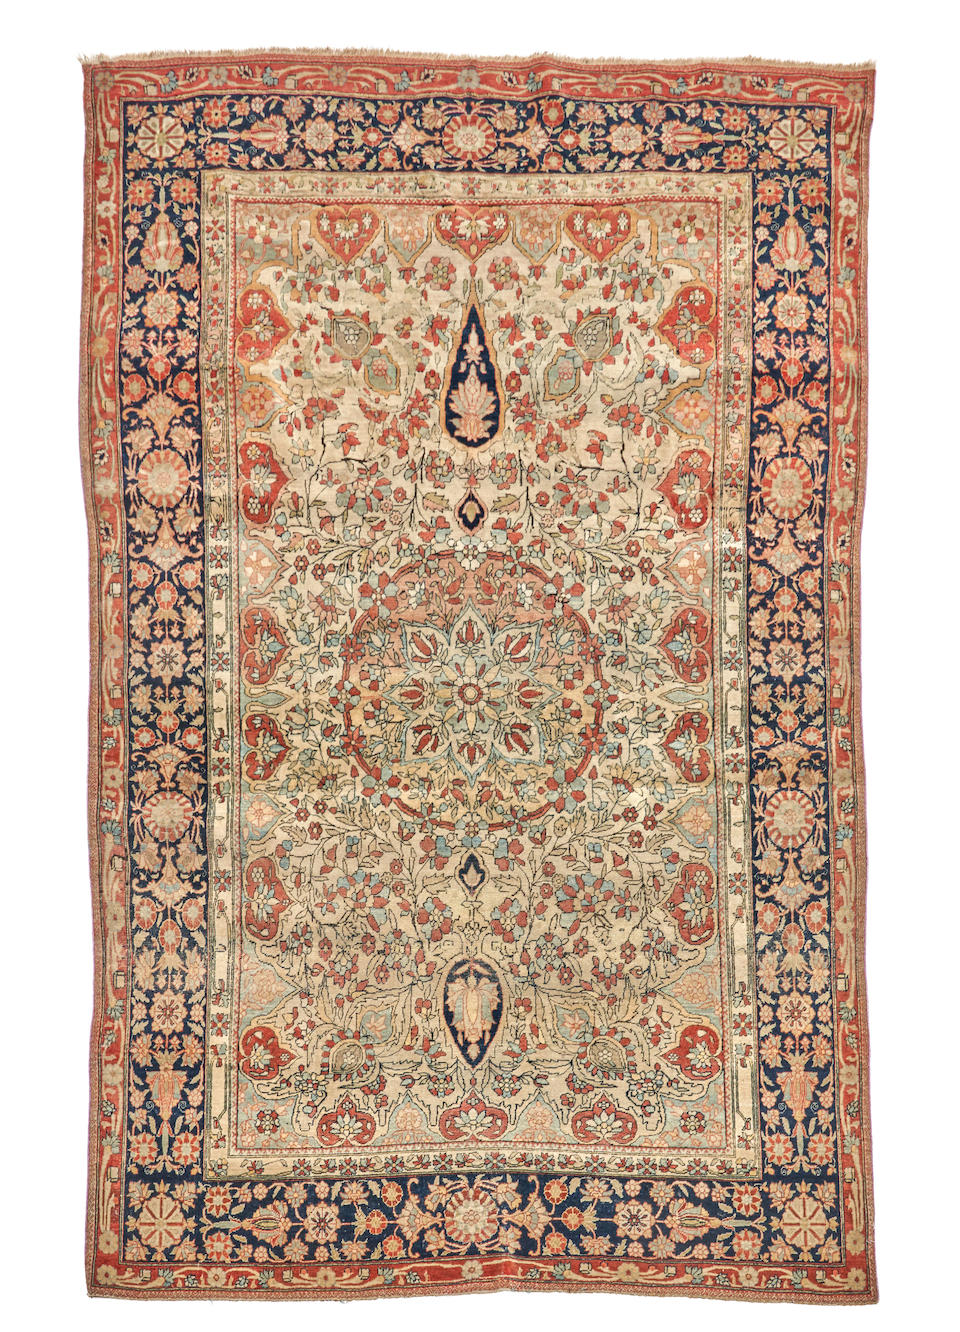 Mohtasham Kashan Iran 4 ft. 2 in. x 6 ft. 6 in.